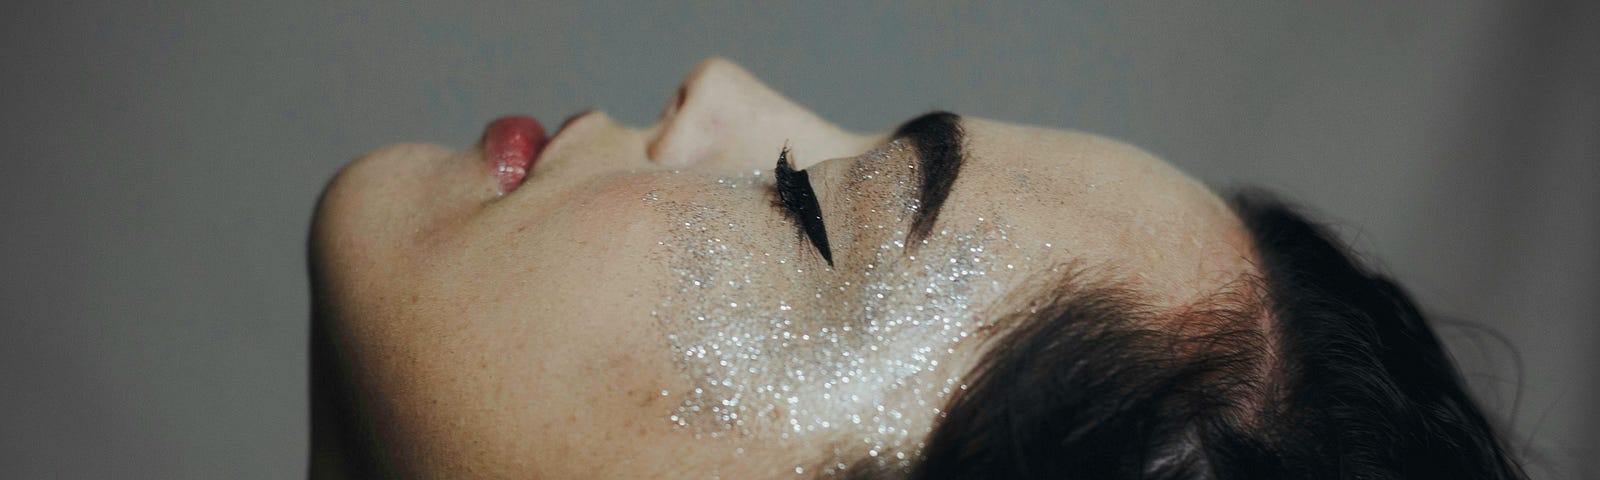 Profile view of a sensual woman with her head tilted back and eyes closed, with silver glitter artfully covering her cheek and temples.